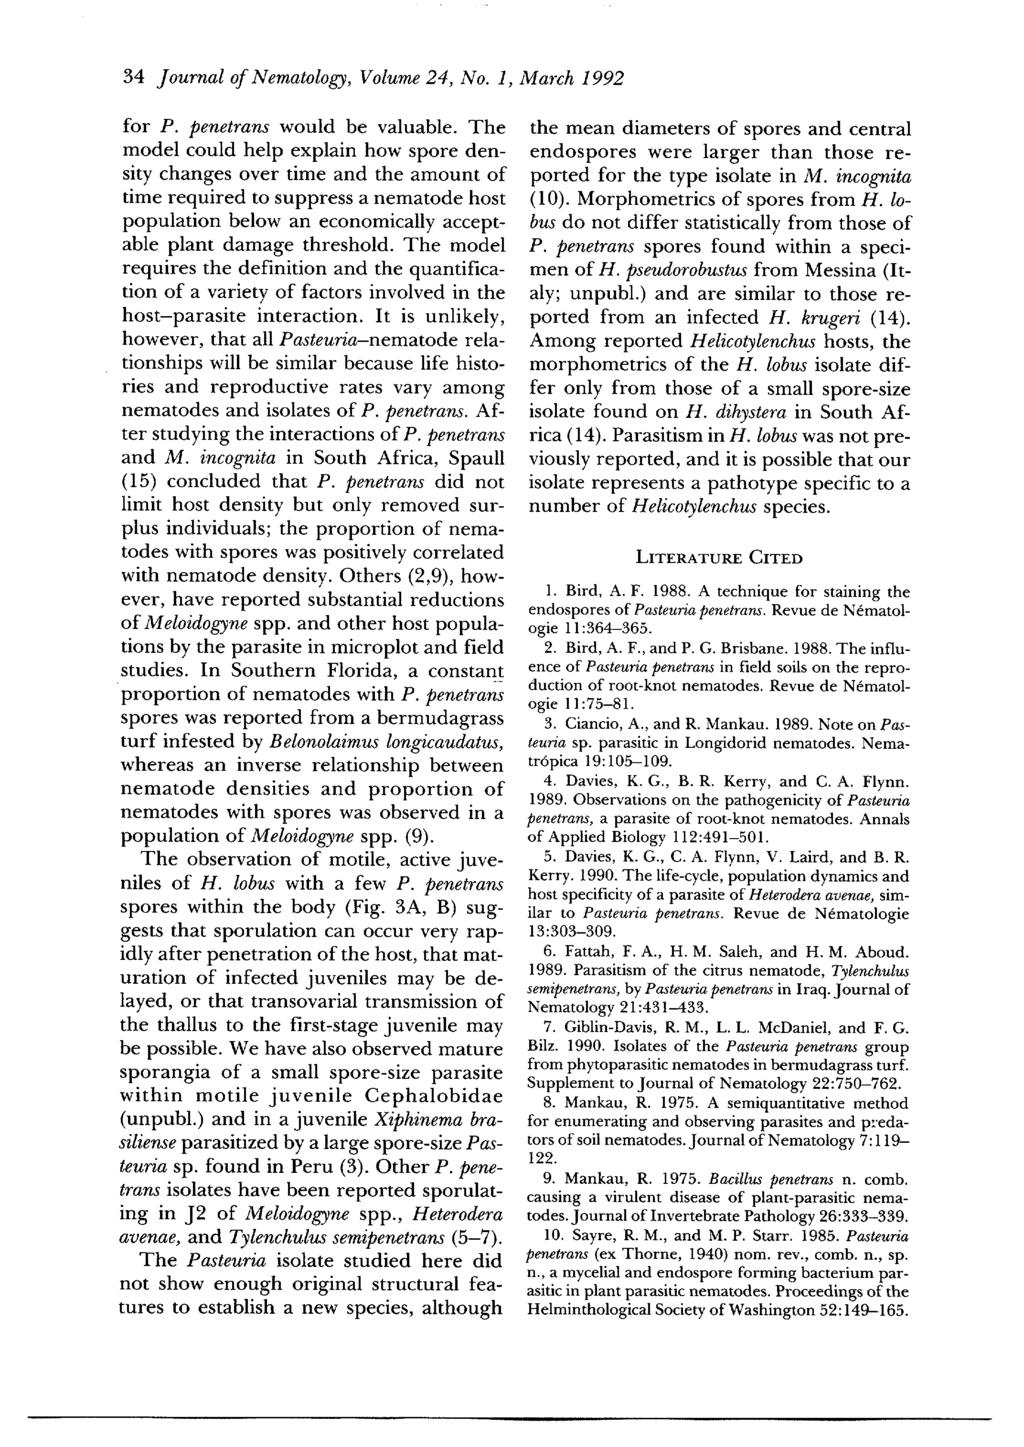 34 Journal of Nematology, Volume 24, No. 1, March 1992 for P. penetrans would be valuable.